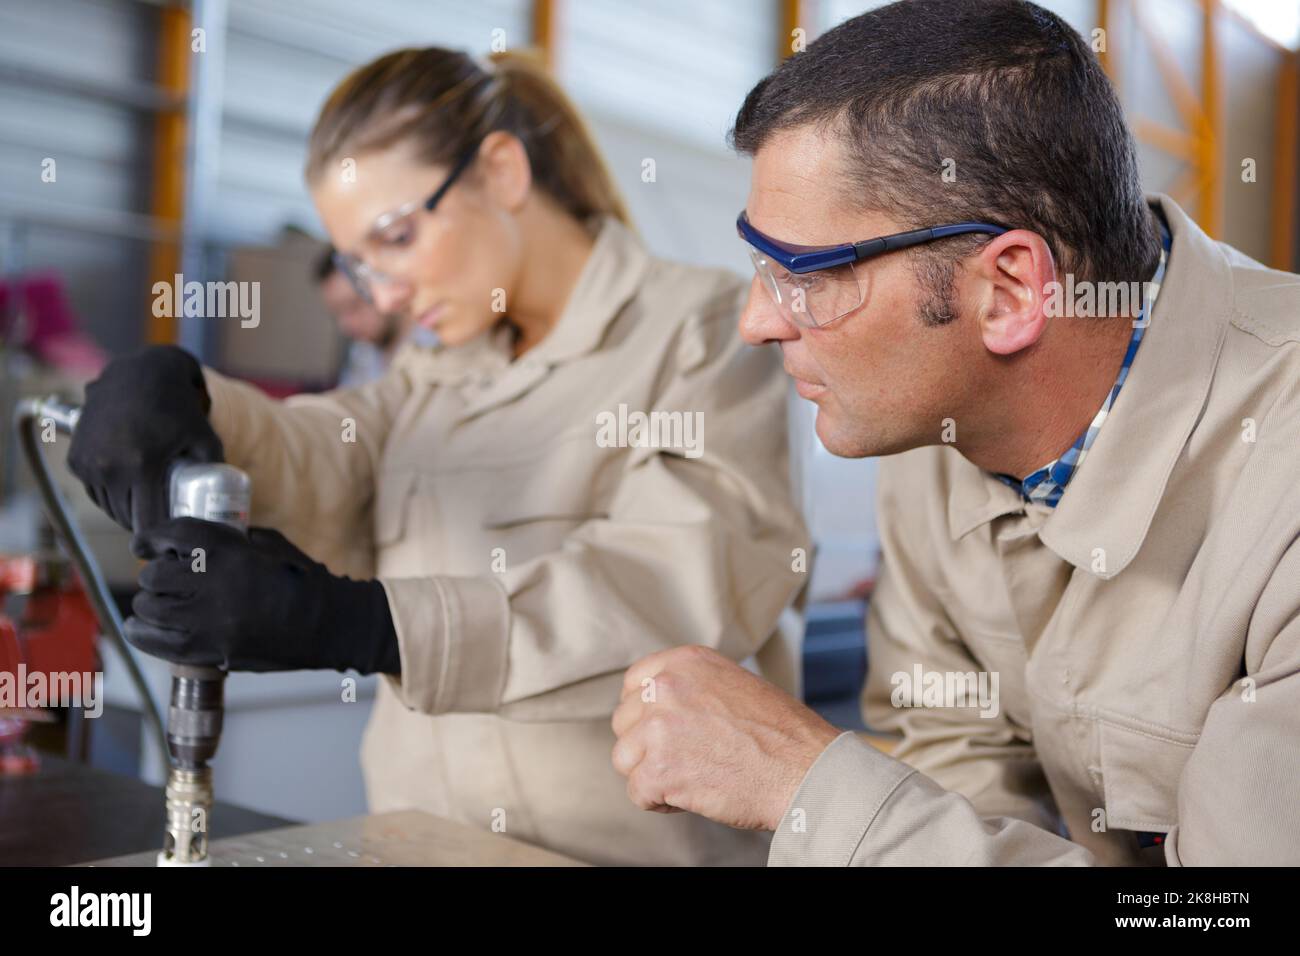 team of workers automotive body parts welder Stock Photo